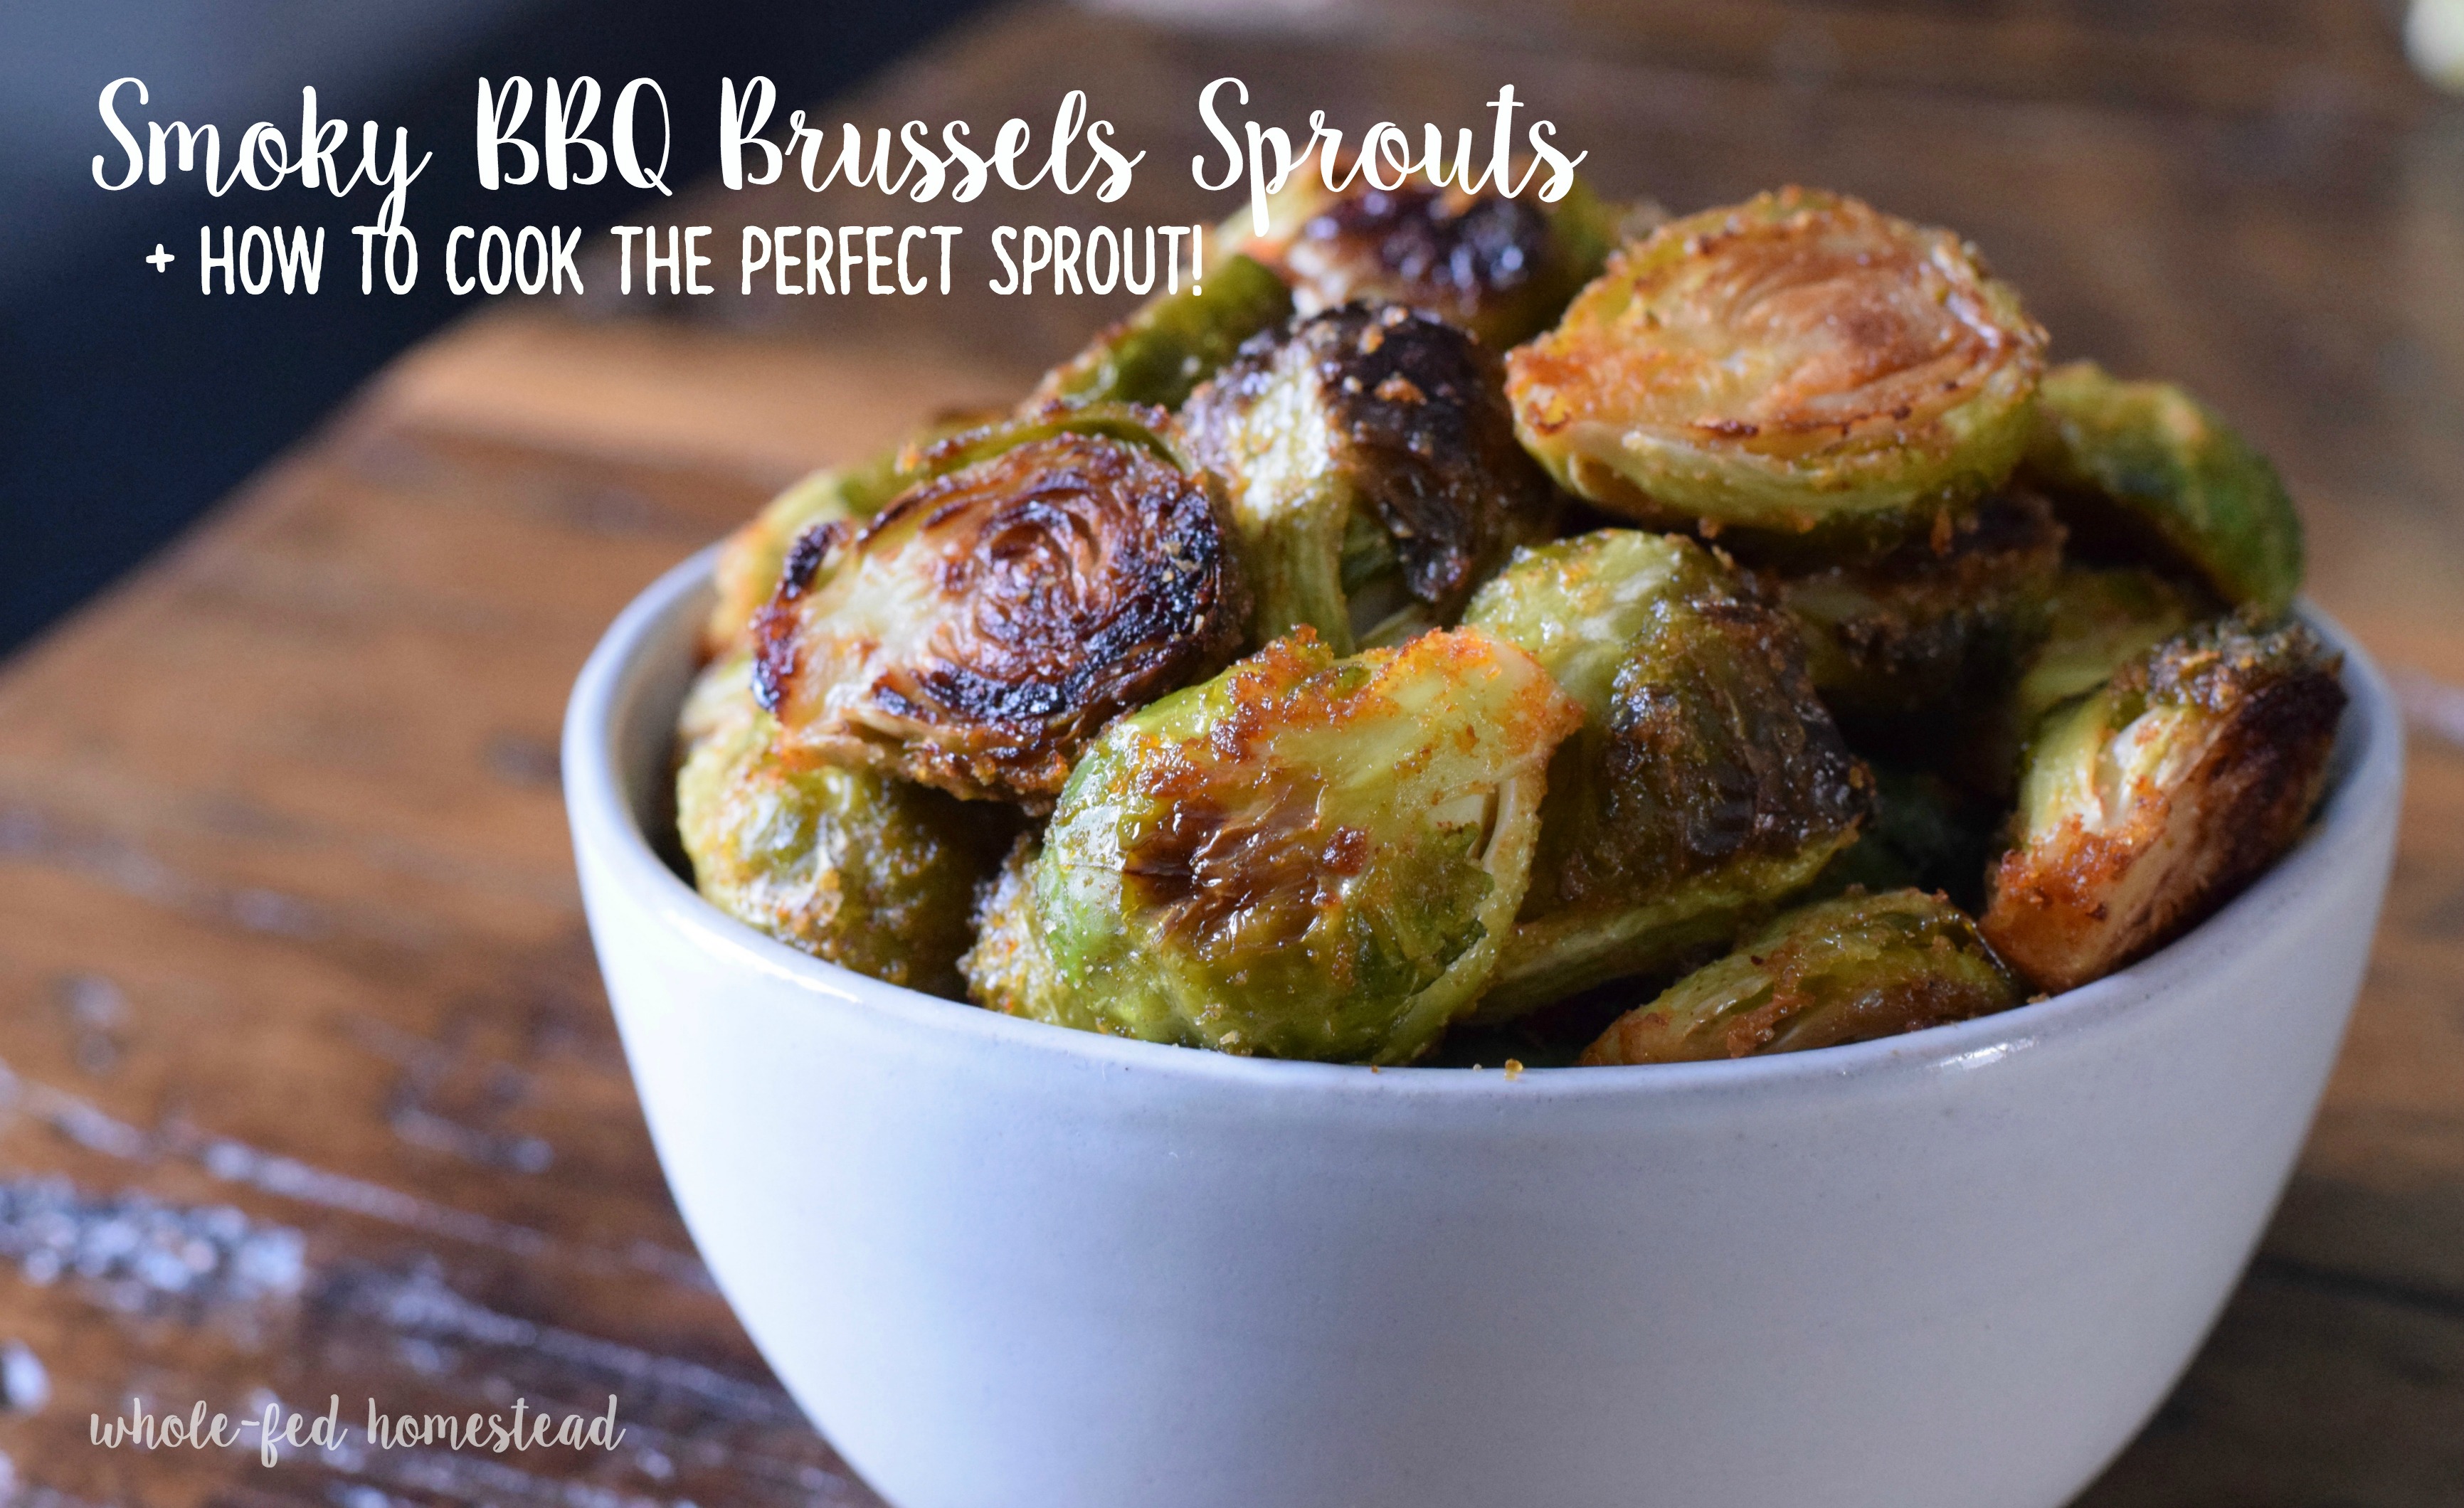 Smokey BBQ Brussels Sprouts Recipe + How to Cook the Perfect Sprout